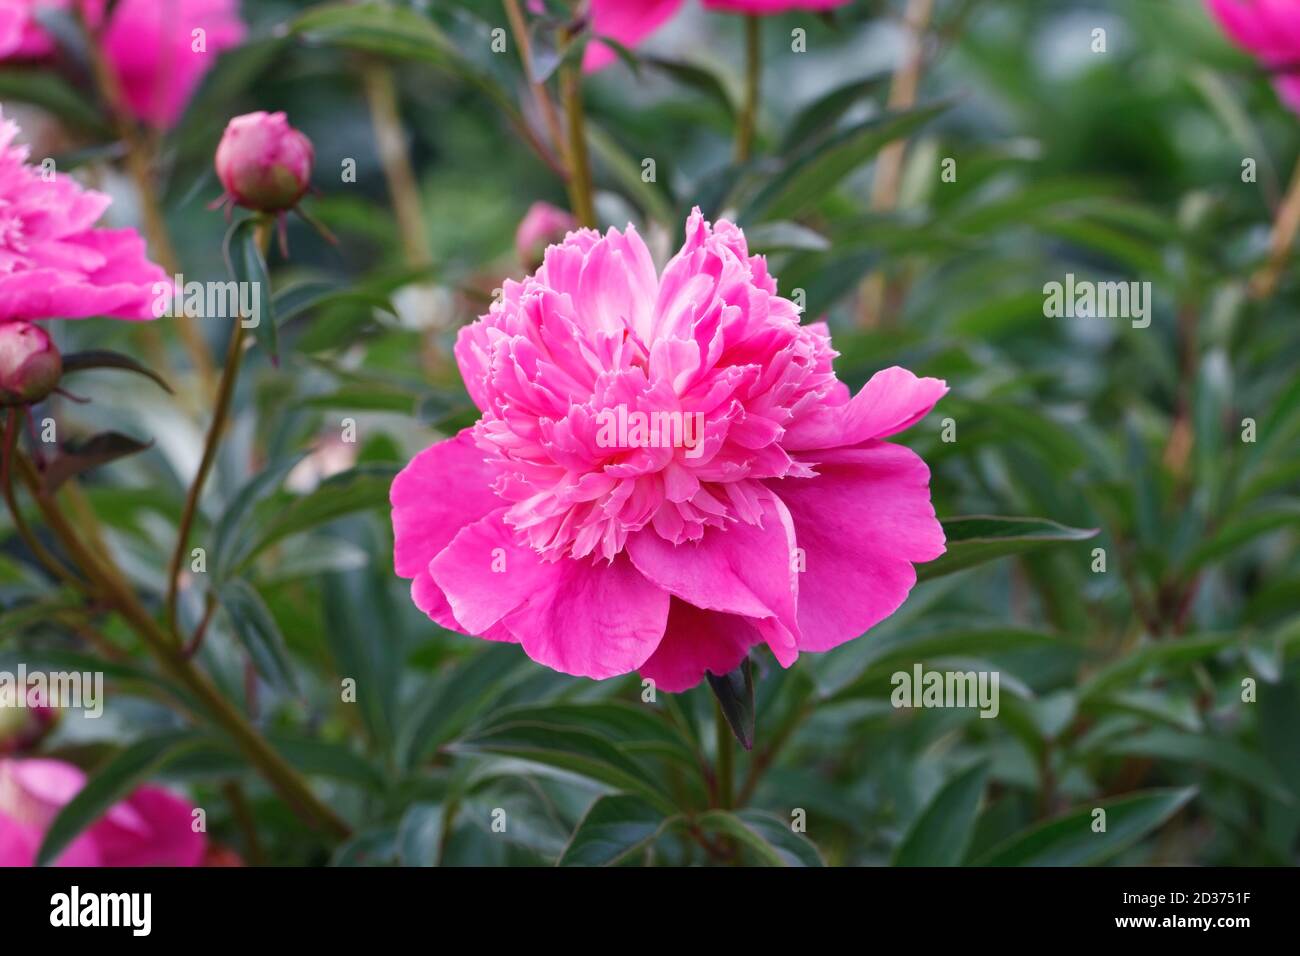 Paeonia flower in an English garden. Pink Peony flower. Stock Photo